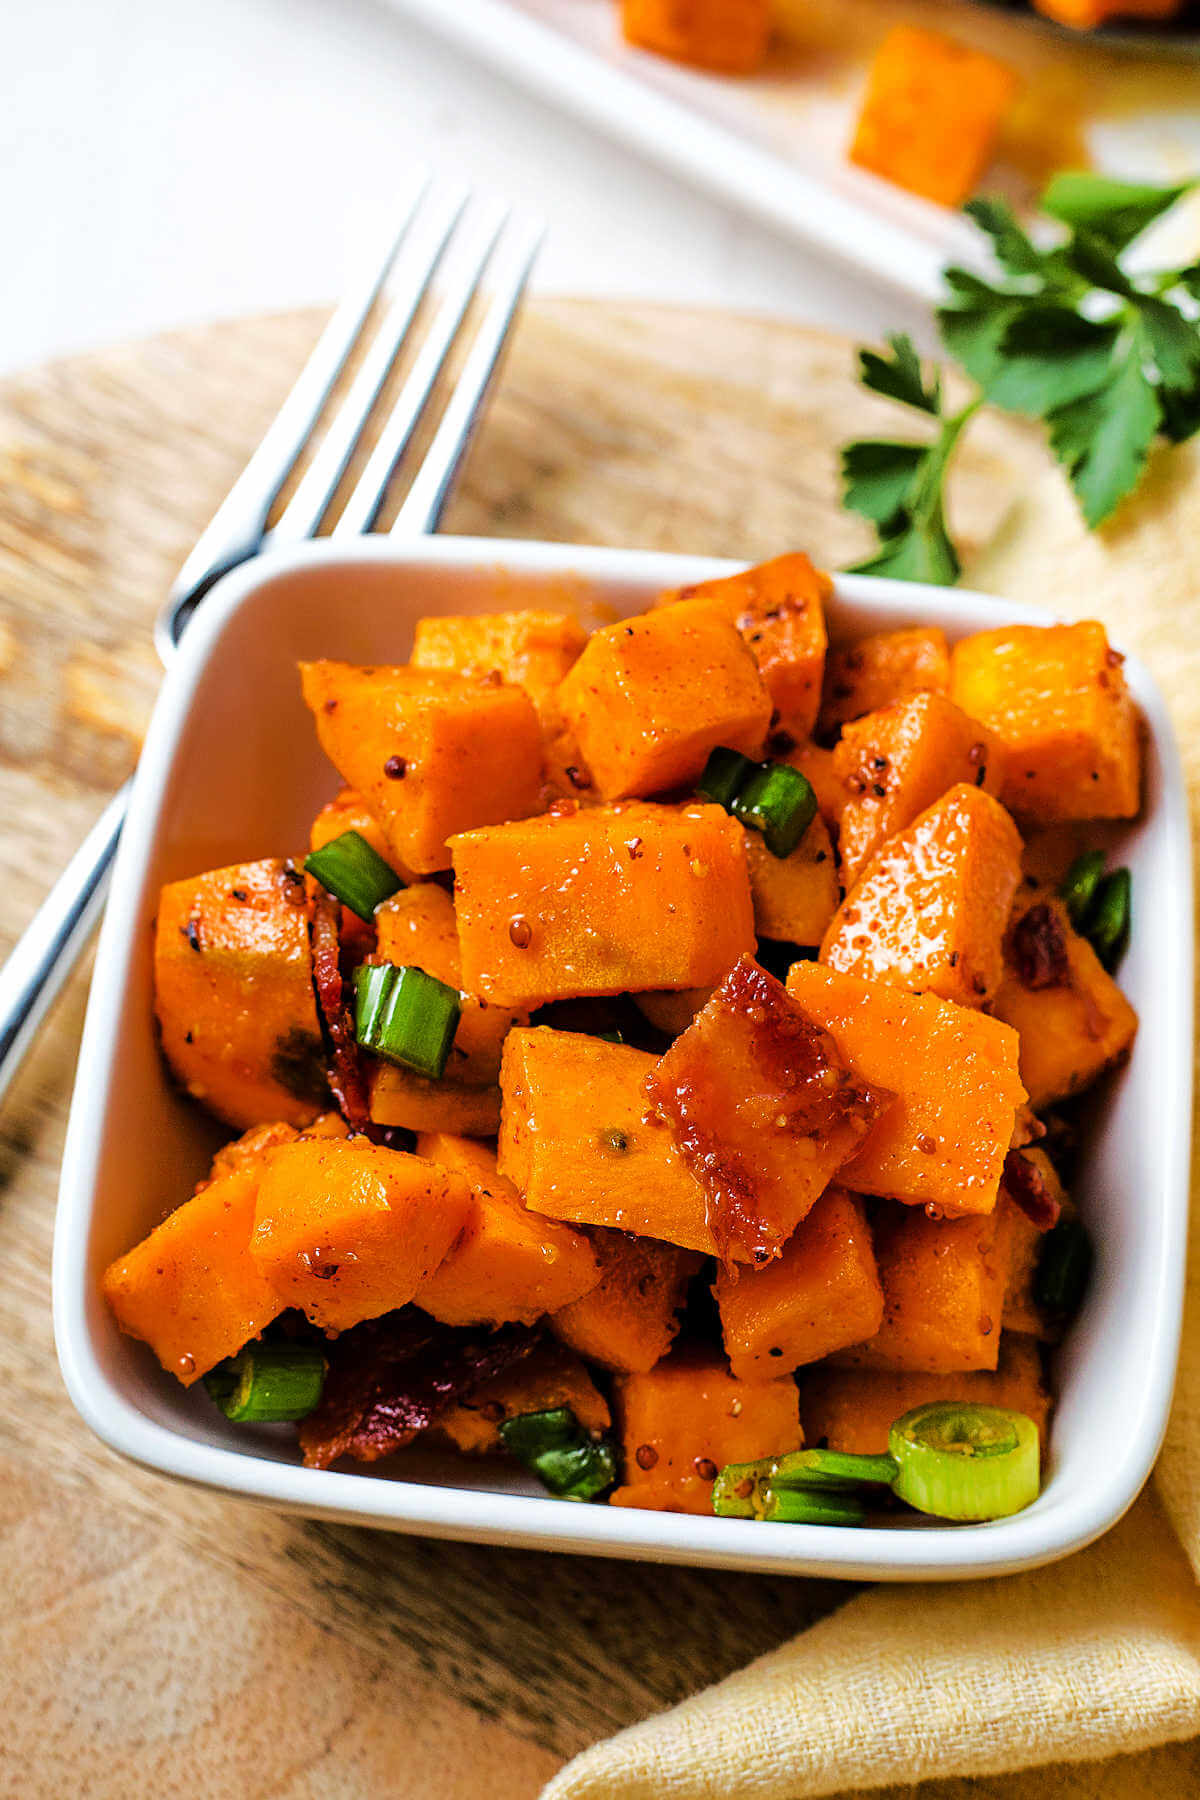 a serving of sweet potato salad in a small white bowl on a table.